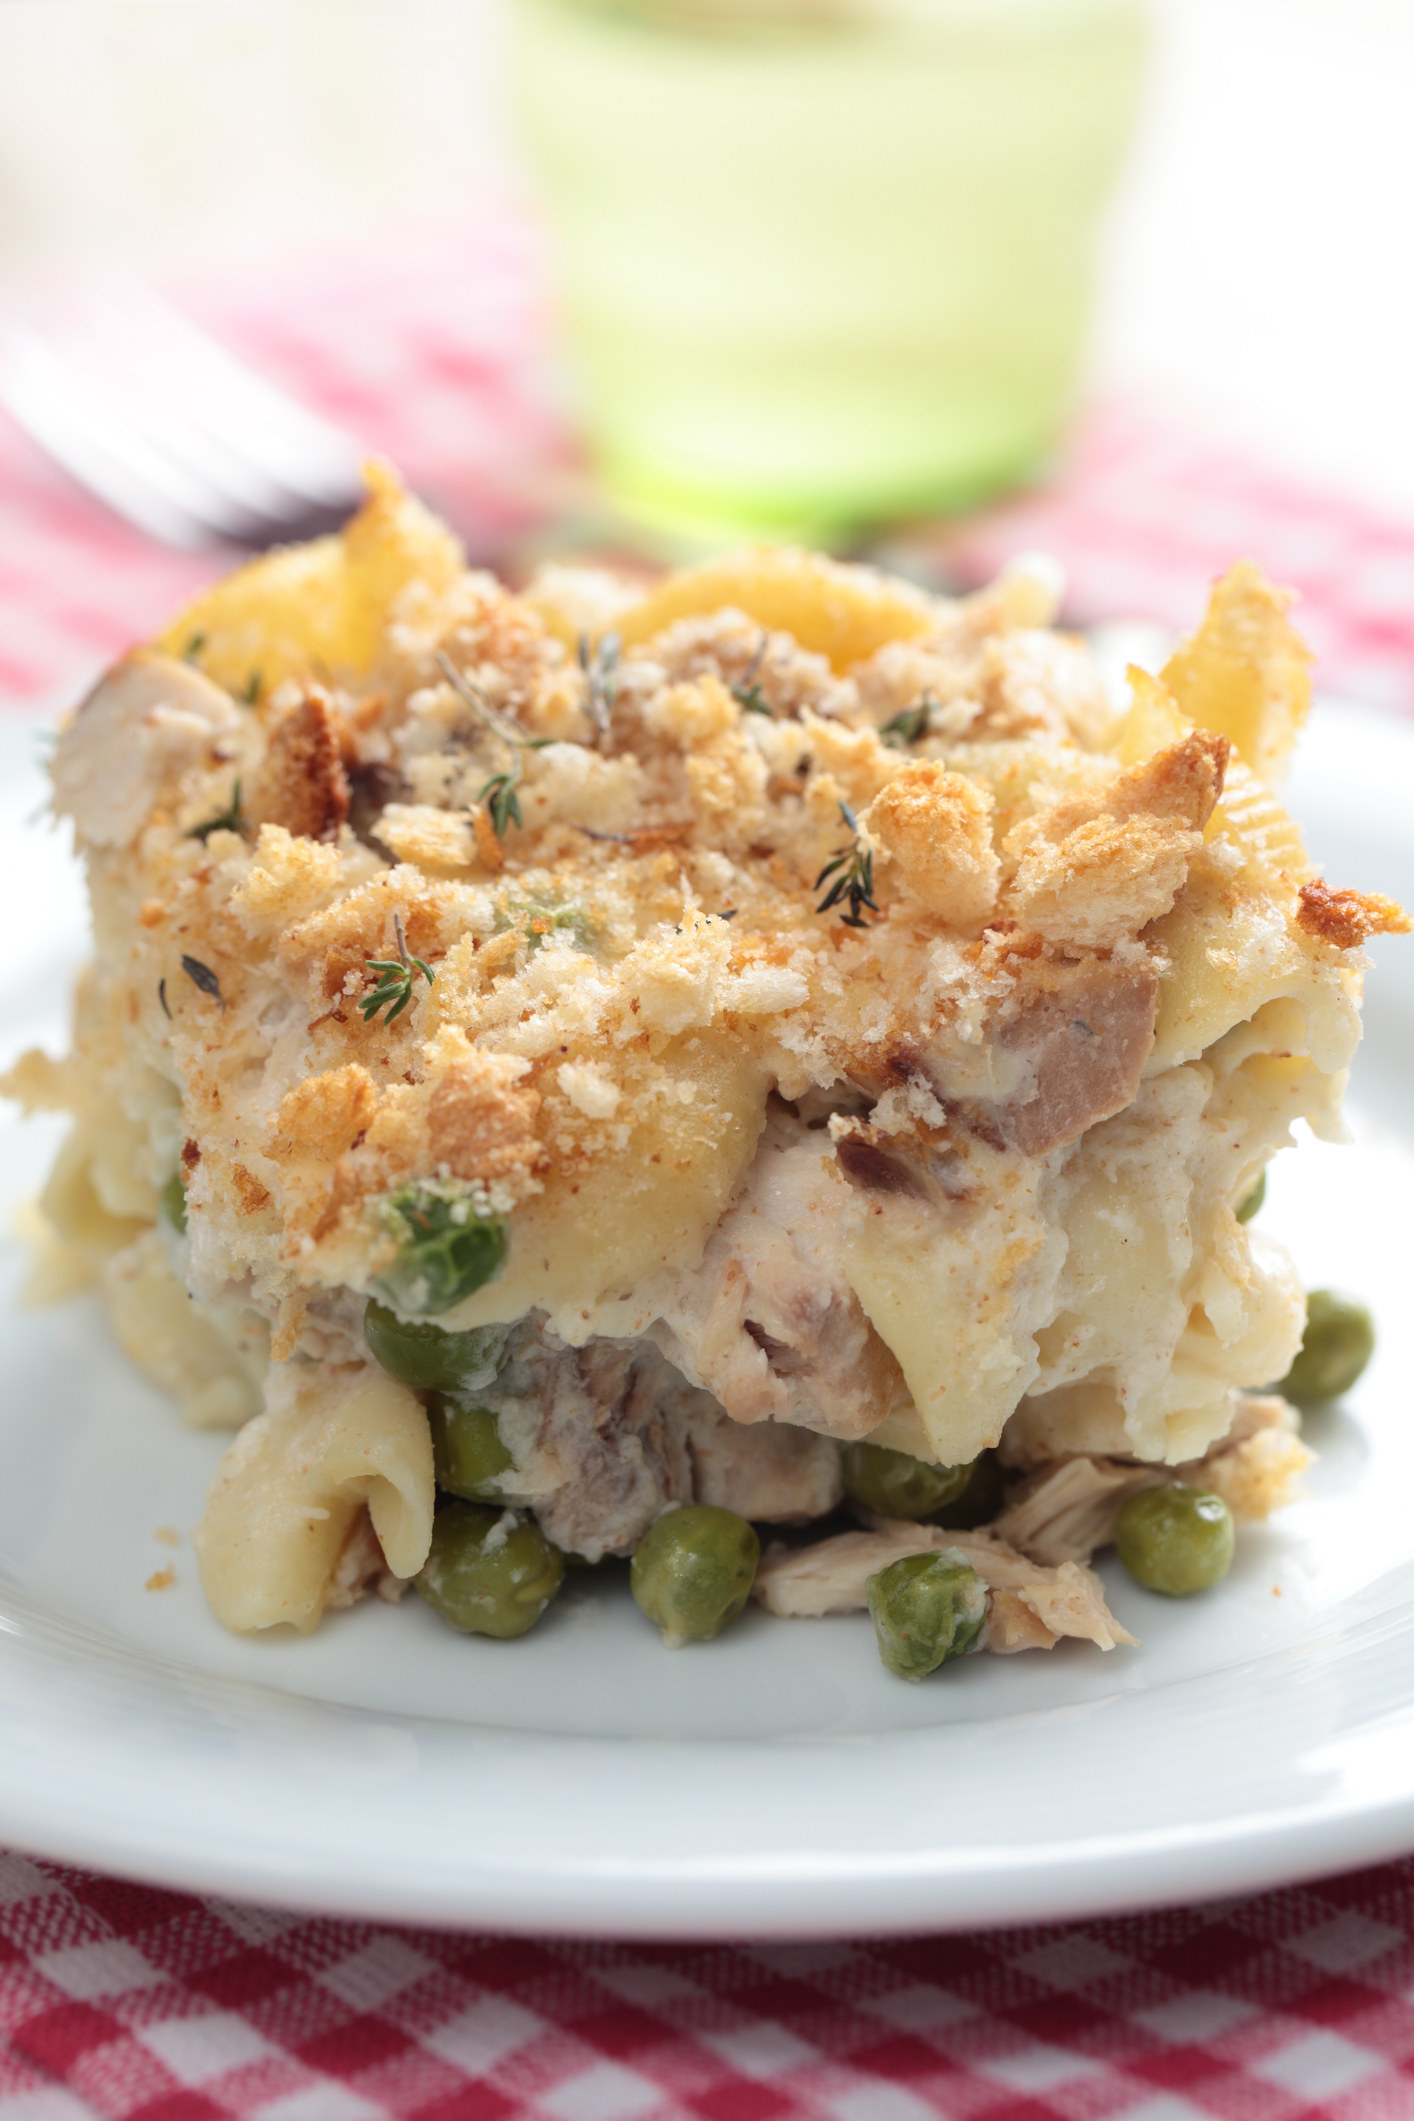 Tuna casserole with pasta and breadcrumbs.